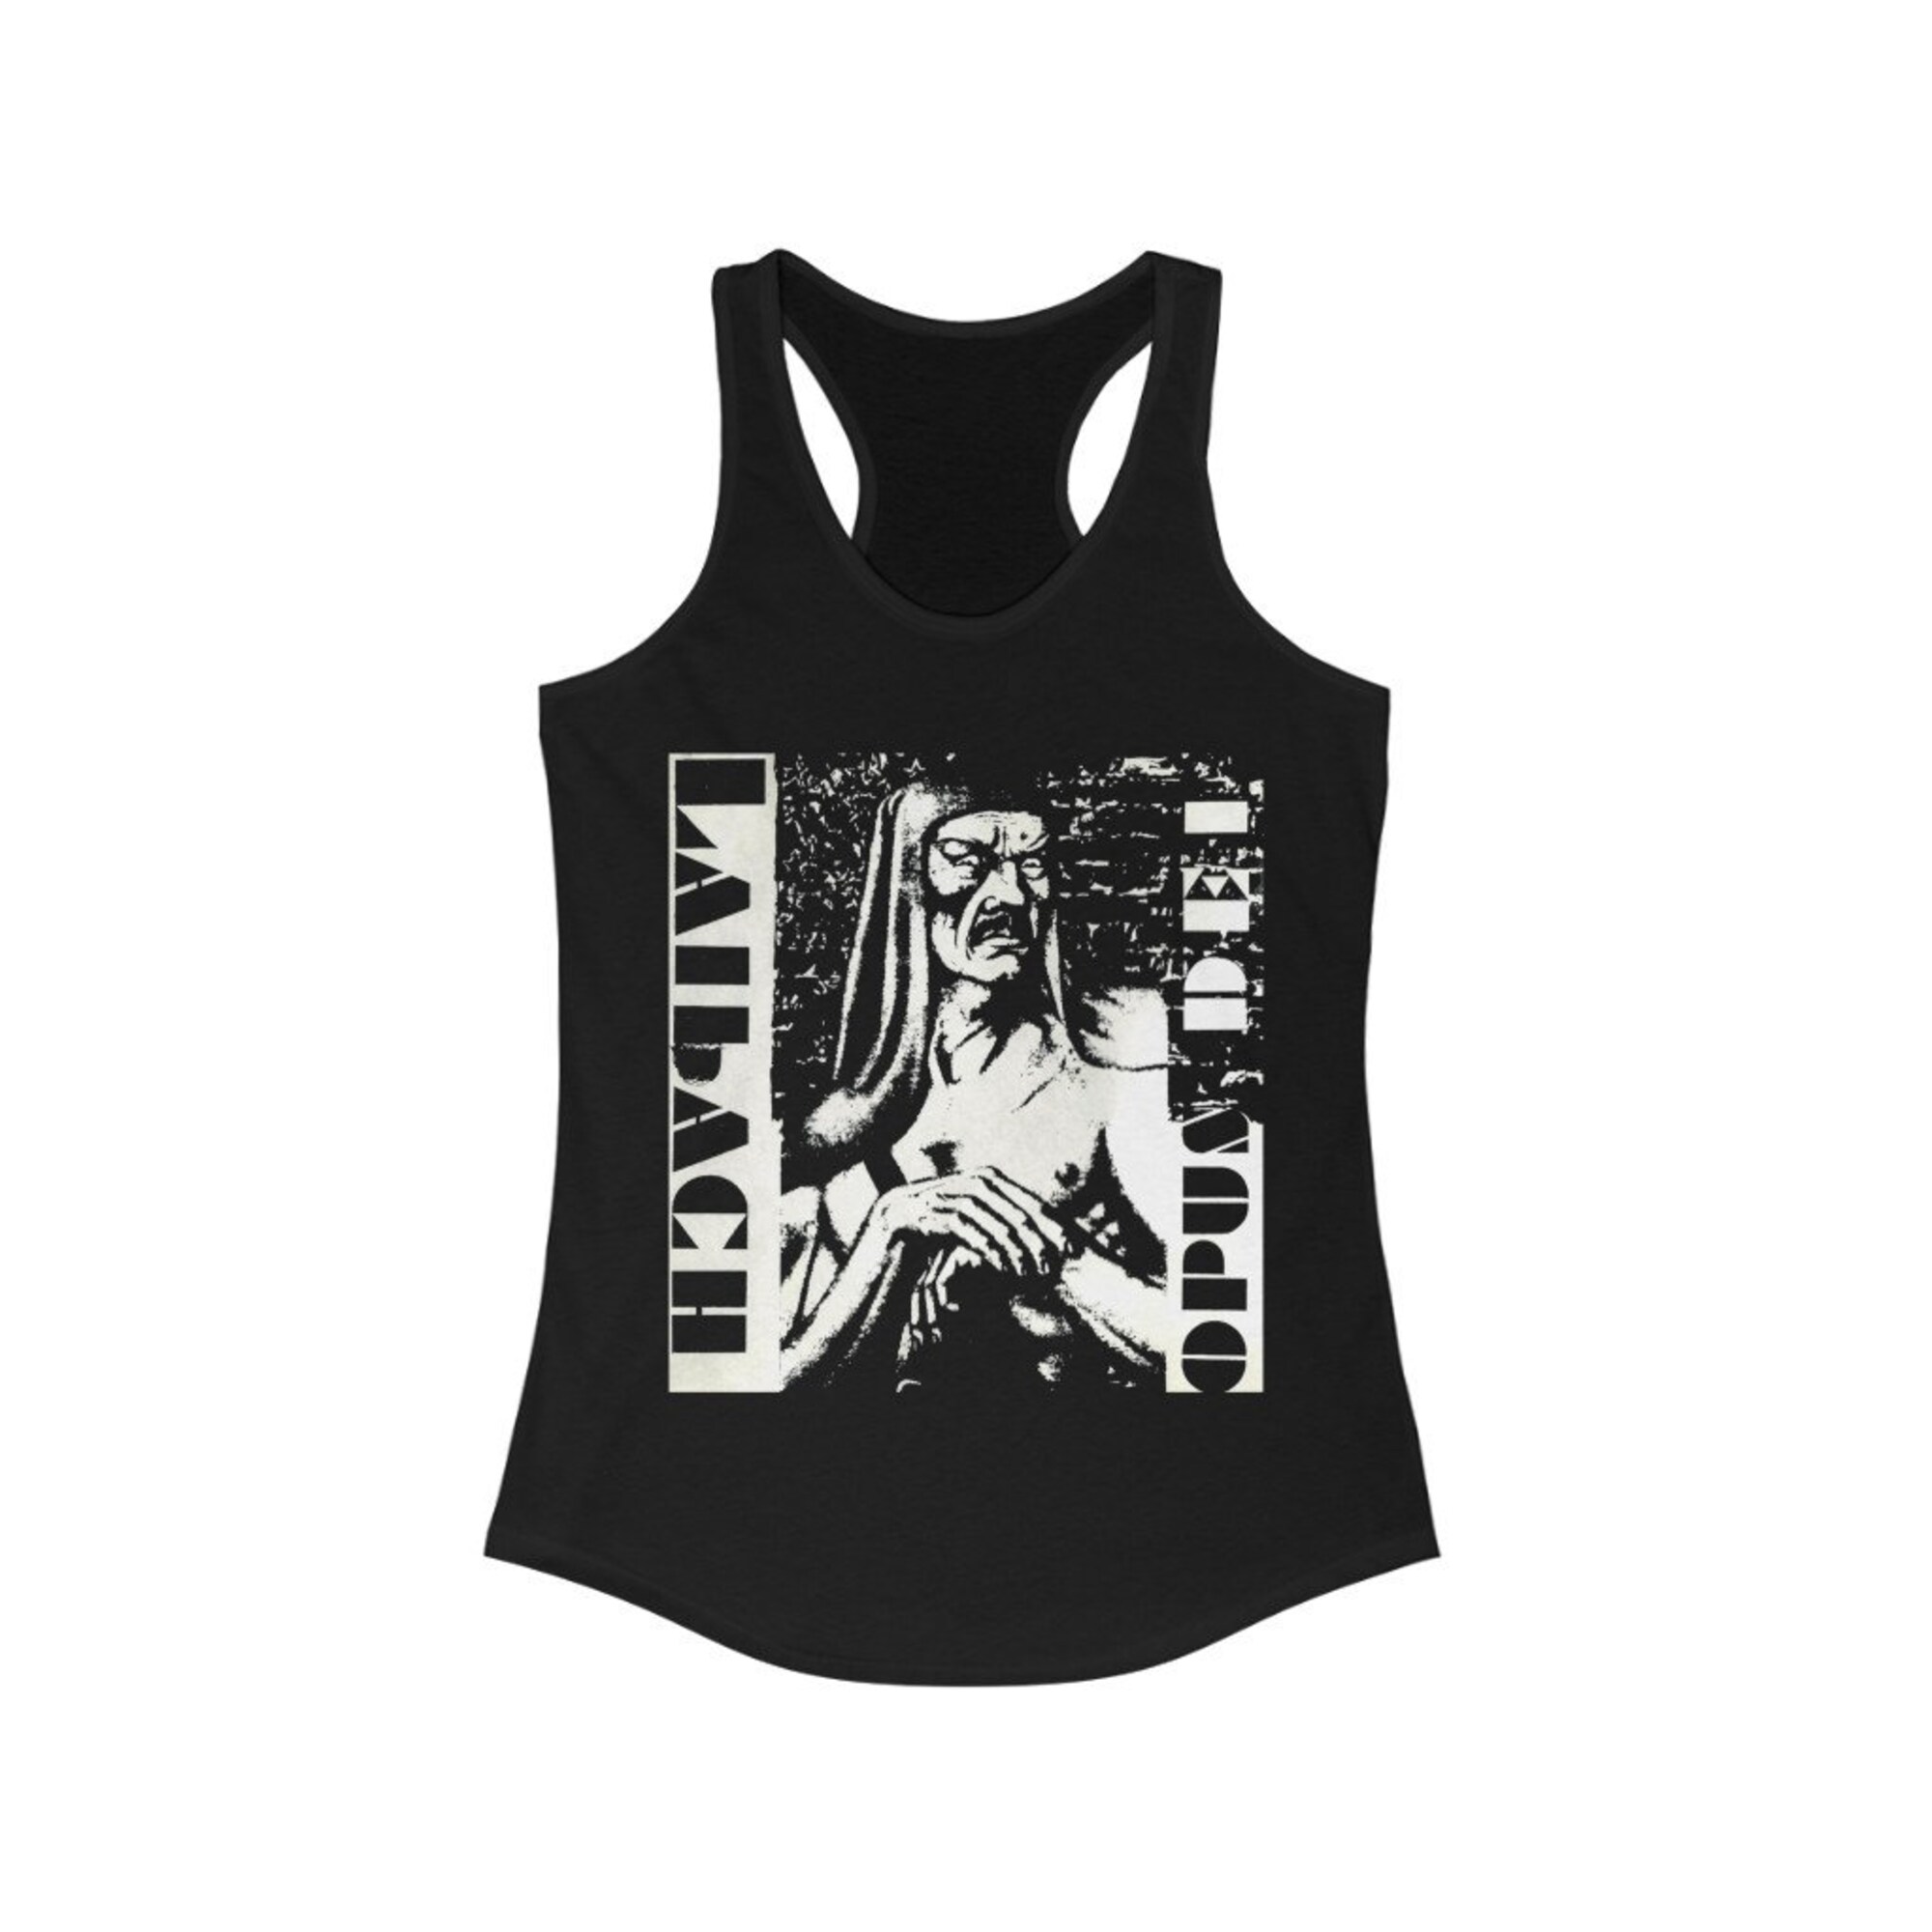 Discover Laibach Womens Tank Top, Laibach - Opus Dei Today, Laibach Sleeveless Tee